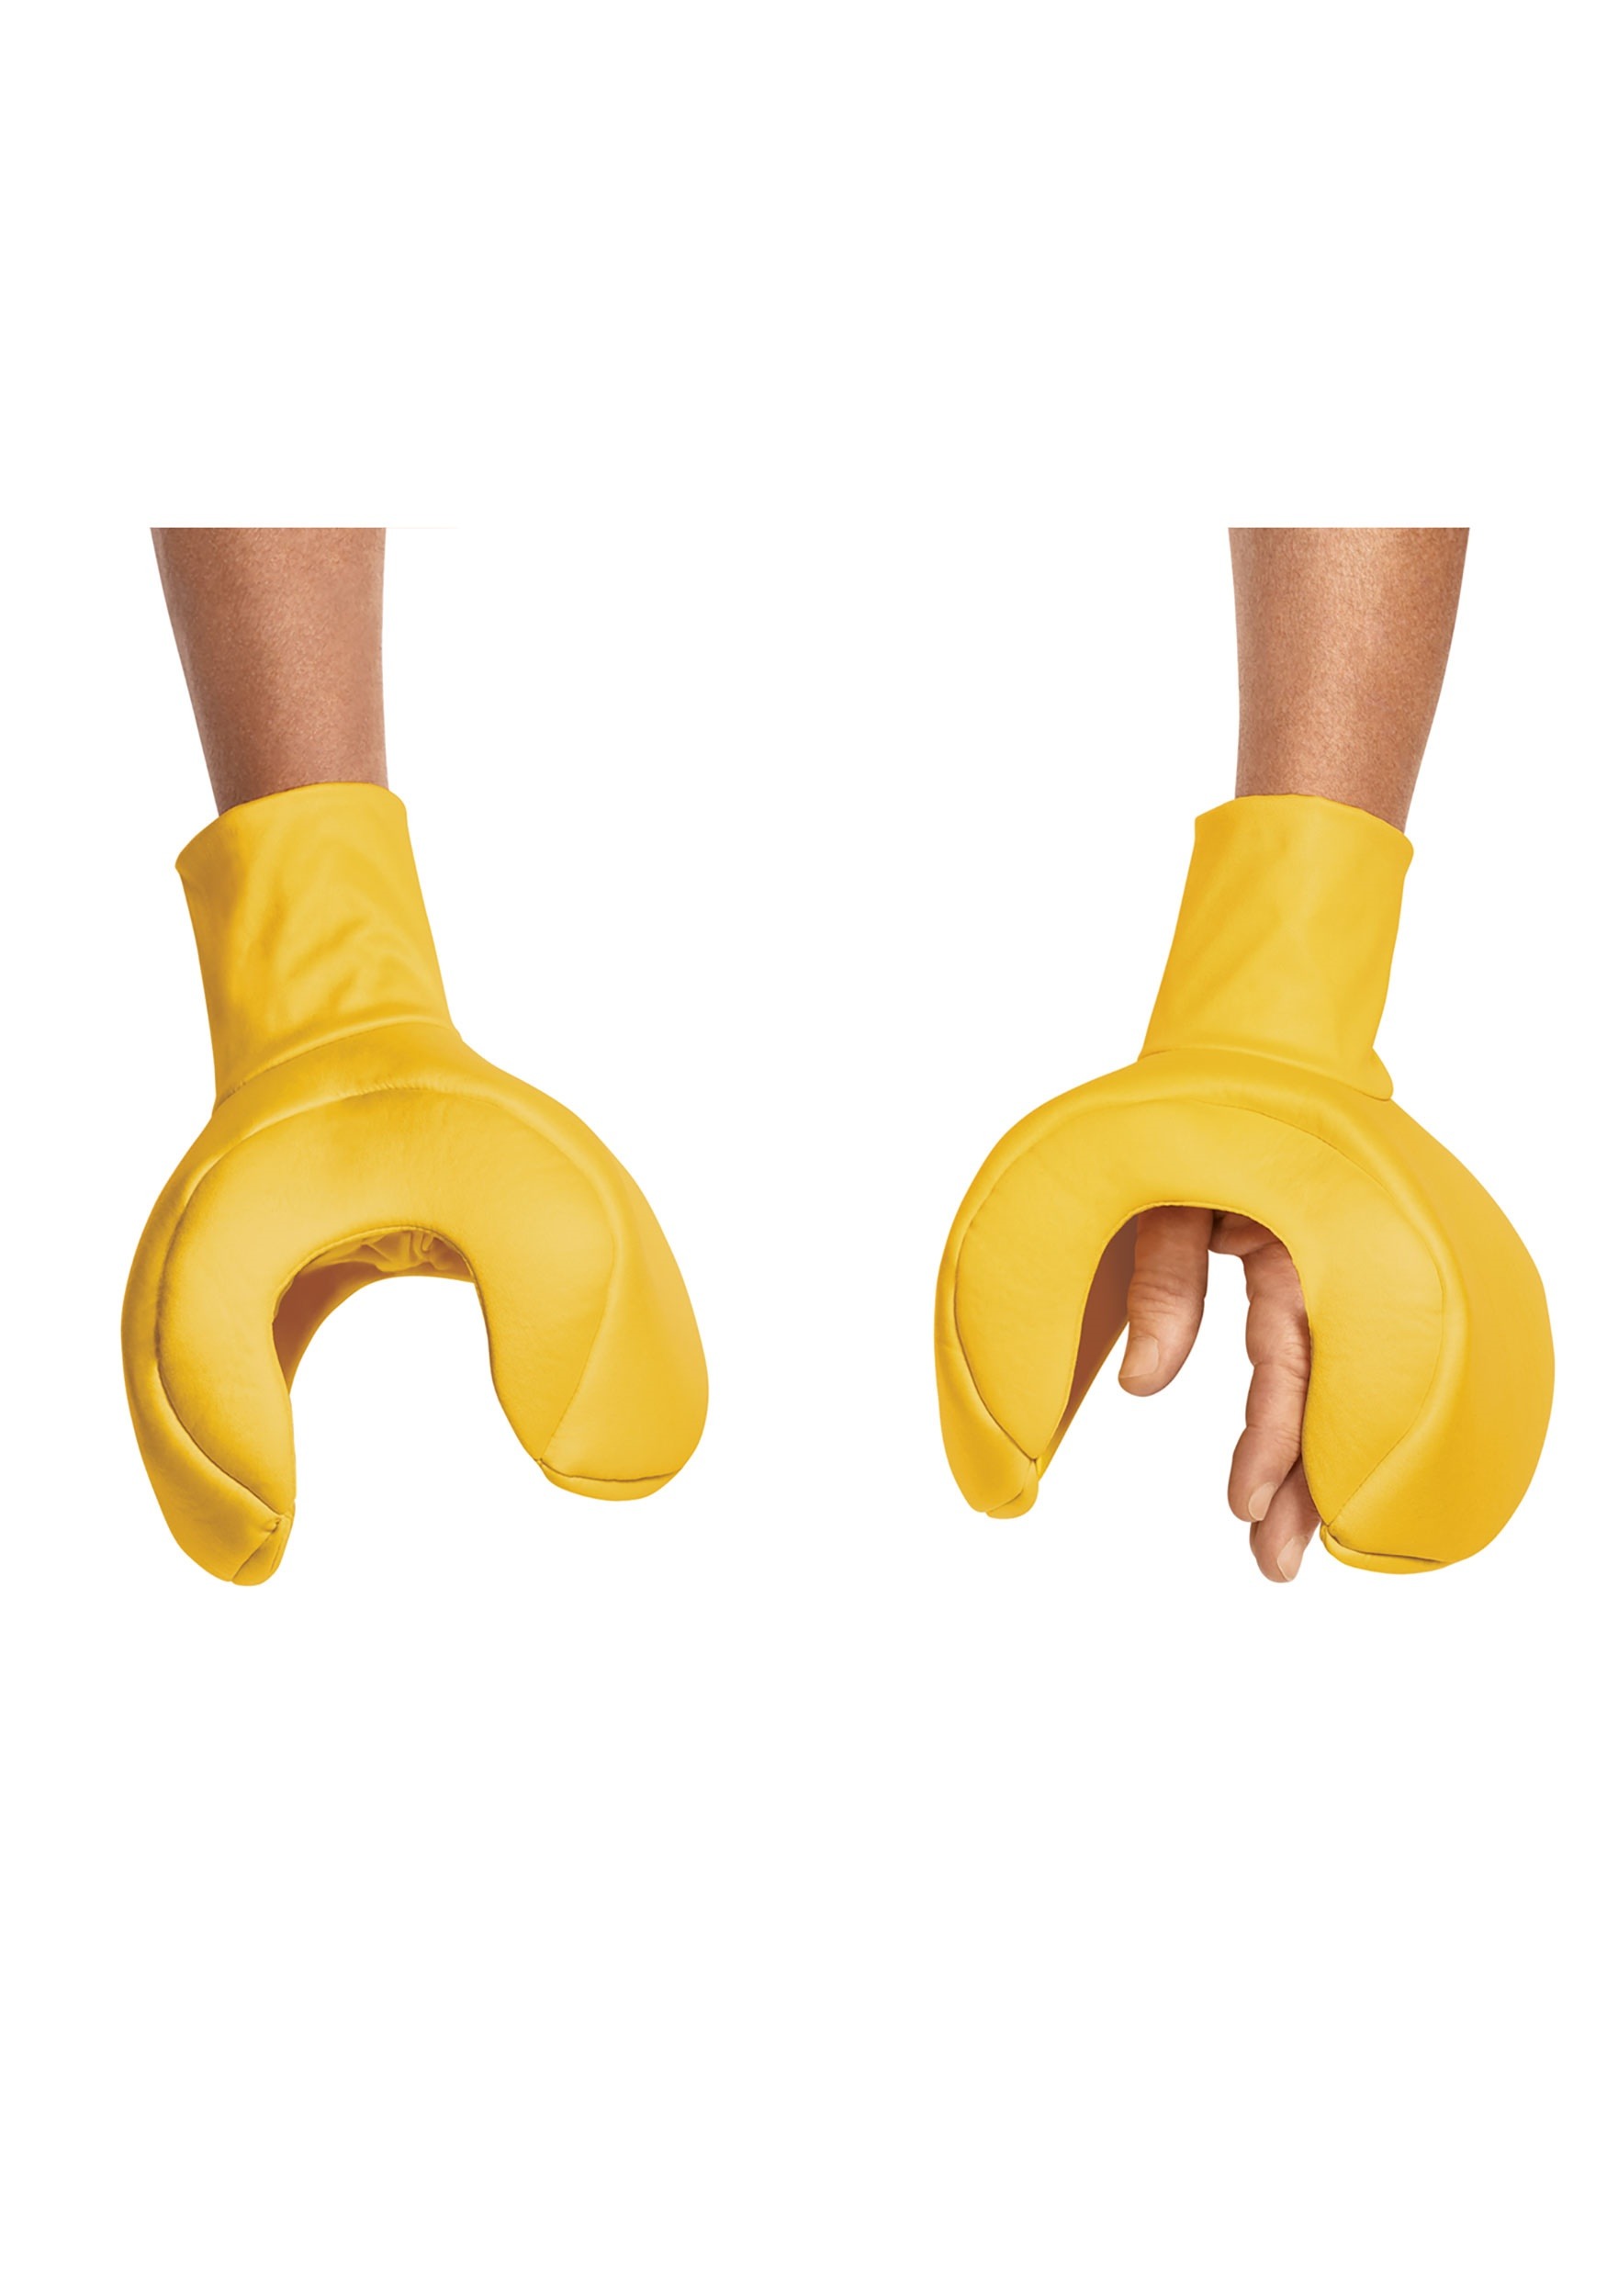 LEGO Hands for Adults